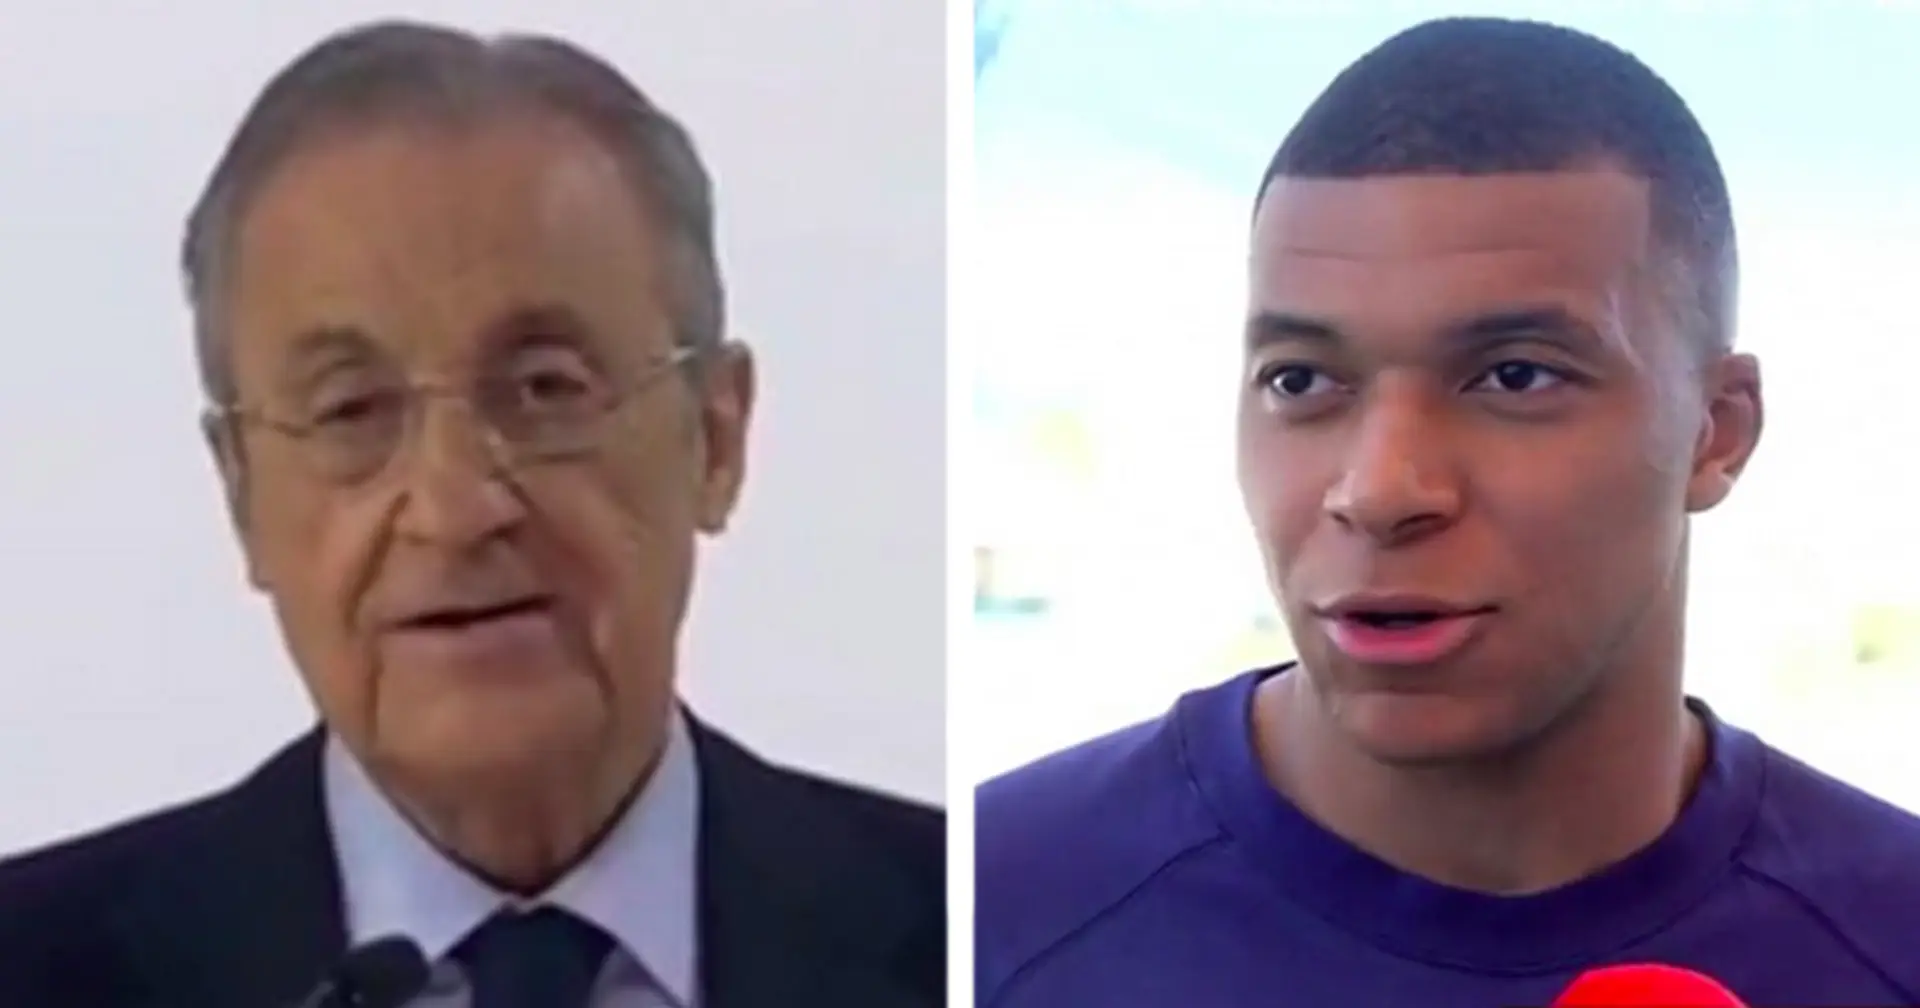 Florentino Perez makes big announcement – it has to do with Kylian Mbappe (reliability: 5 stars)